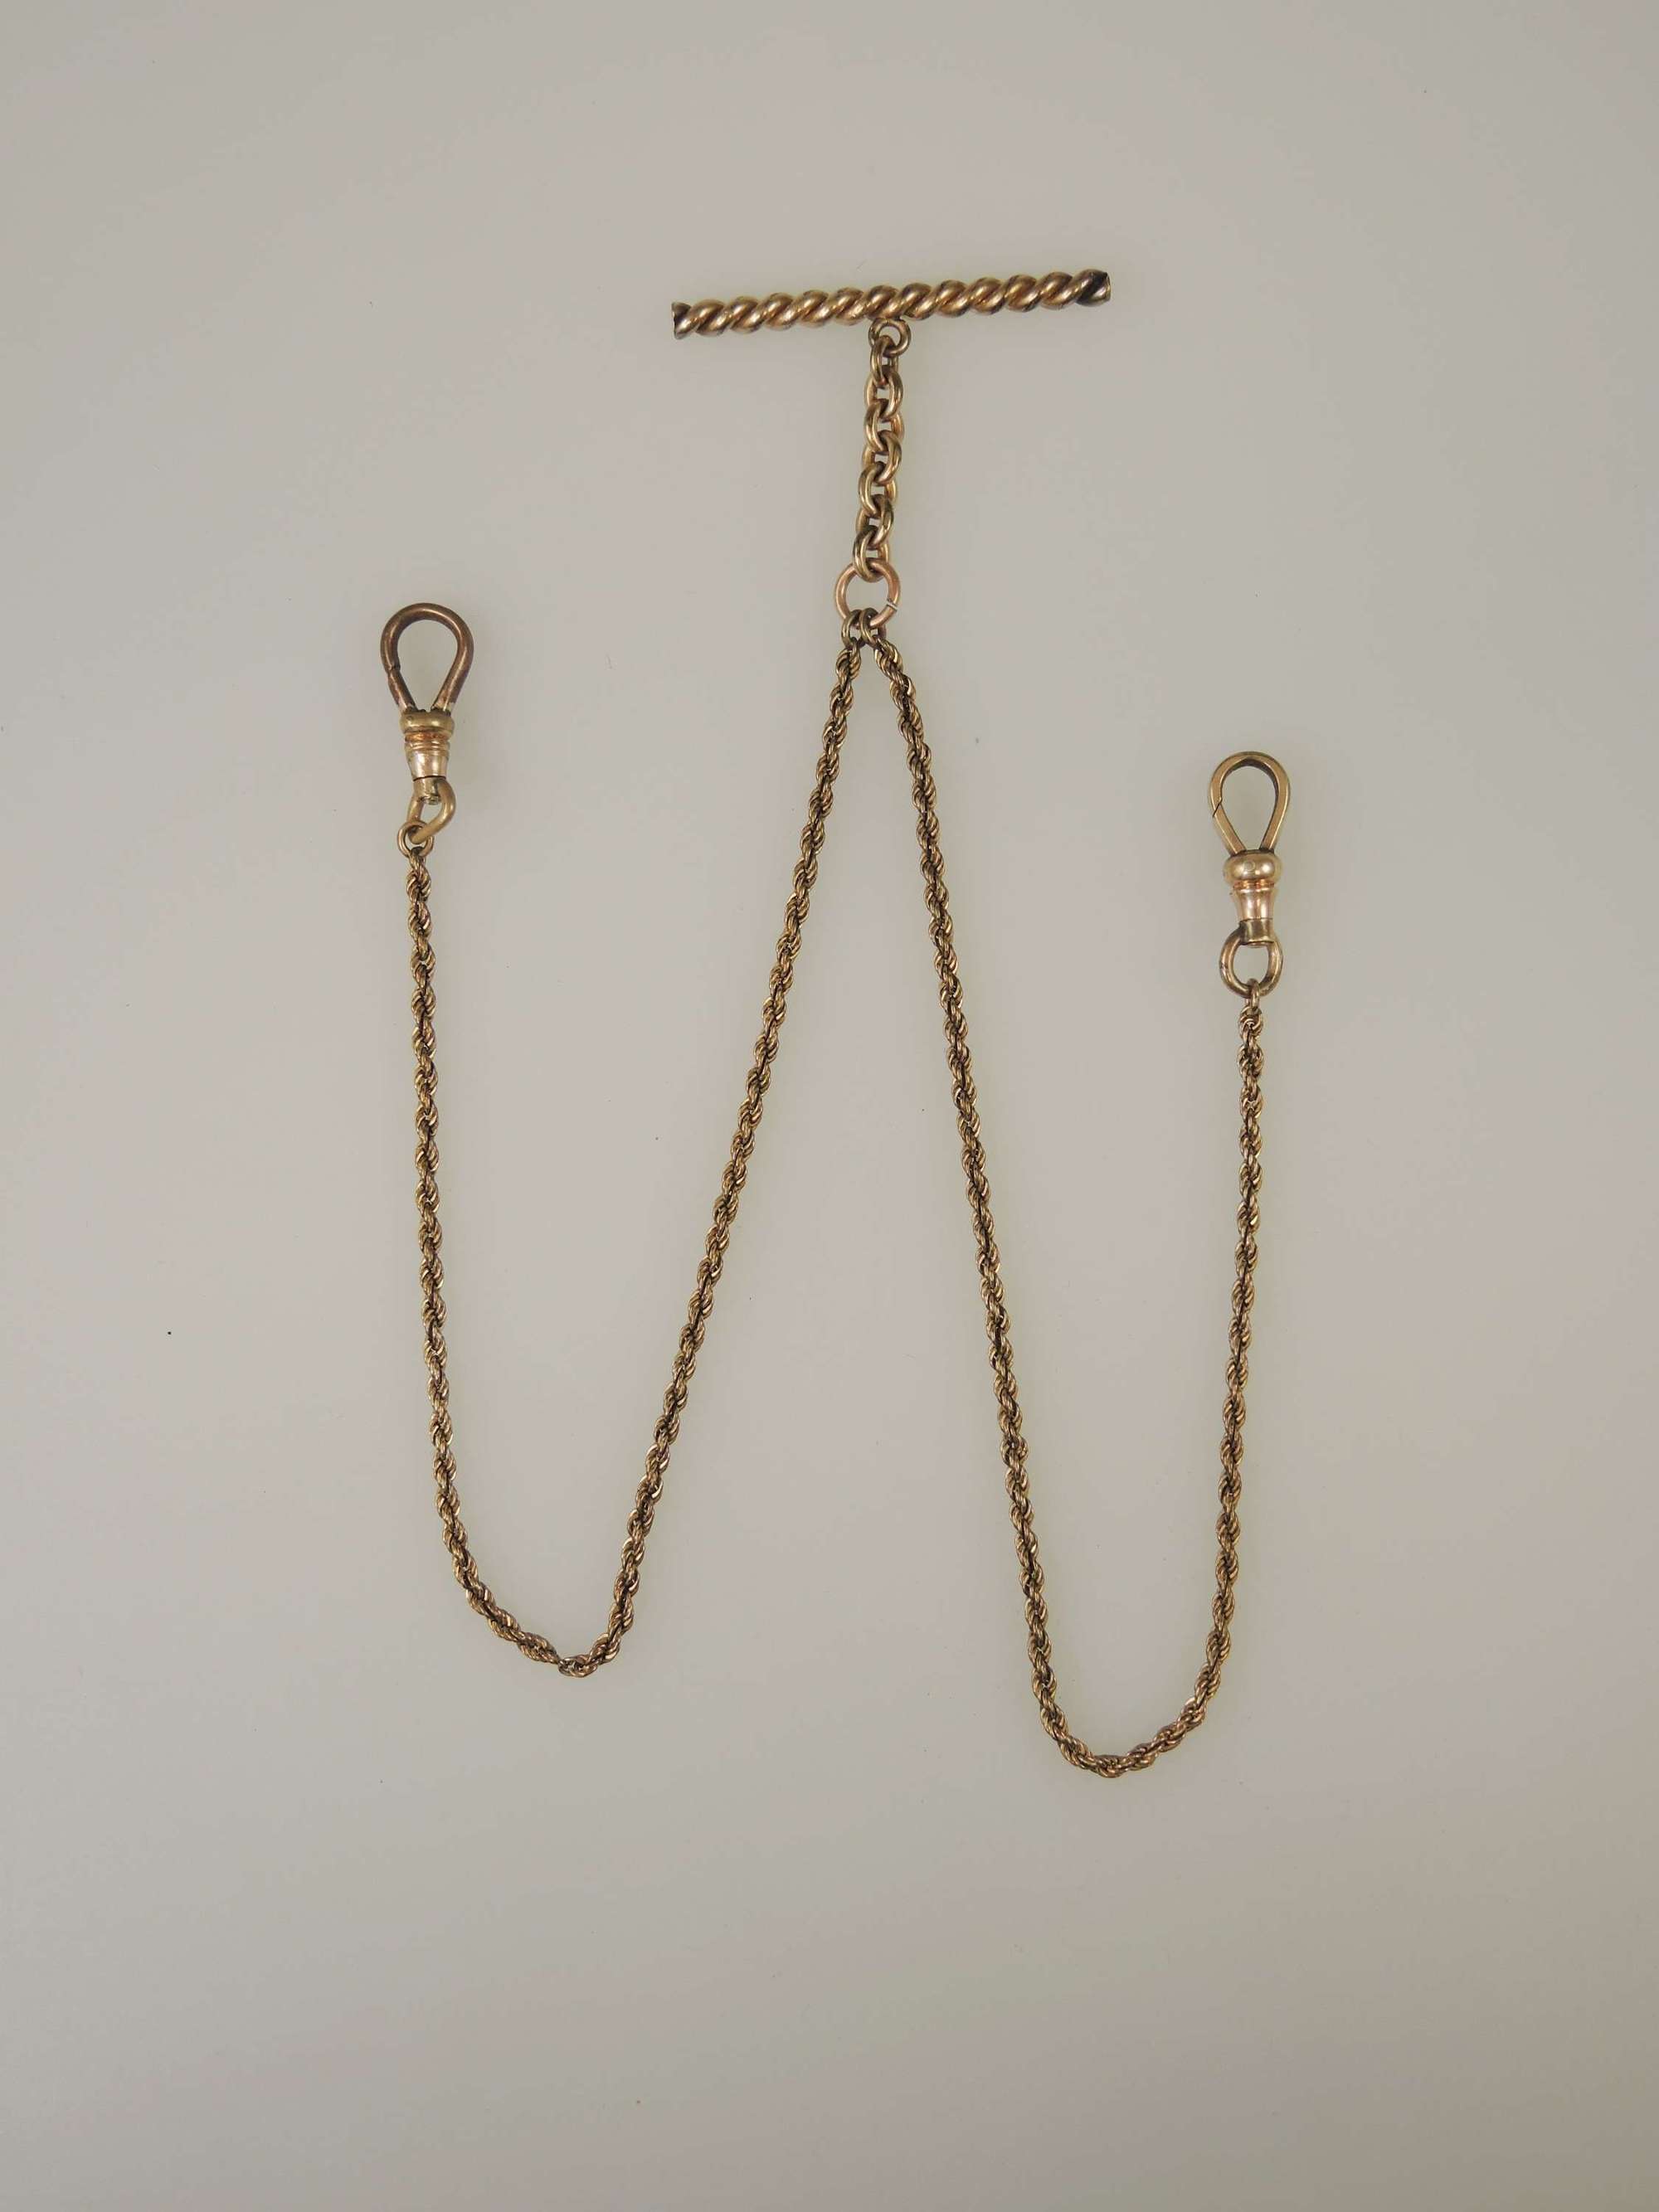 Victorian gold plated double watch chain c1890